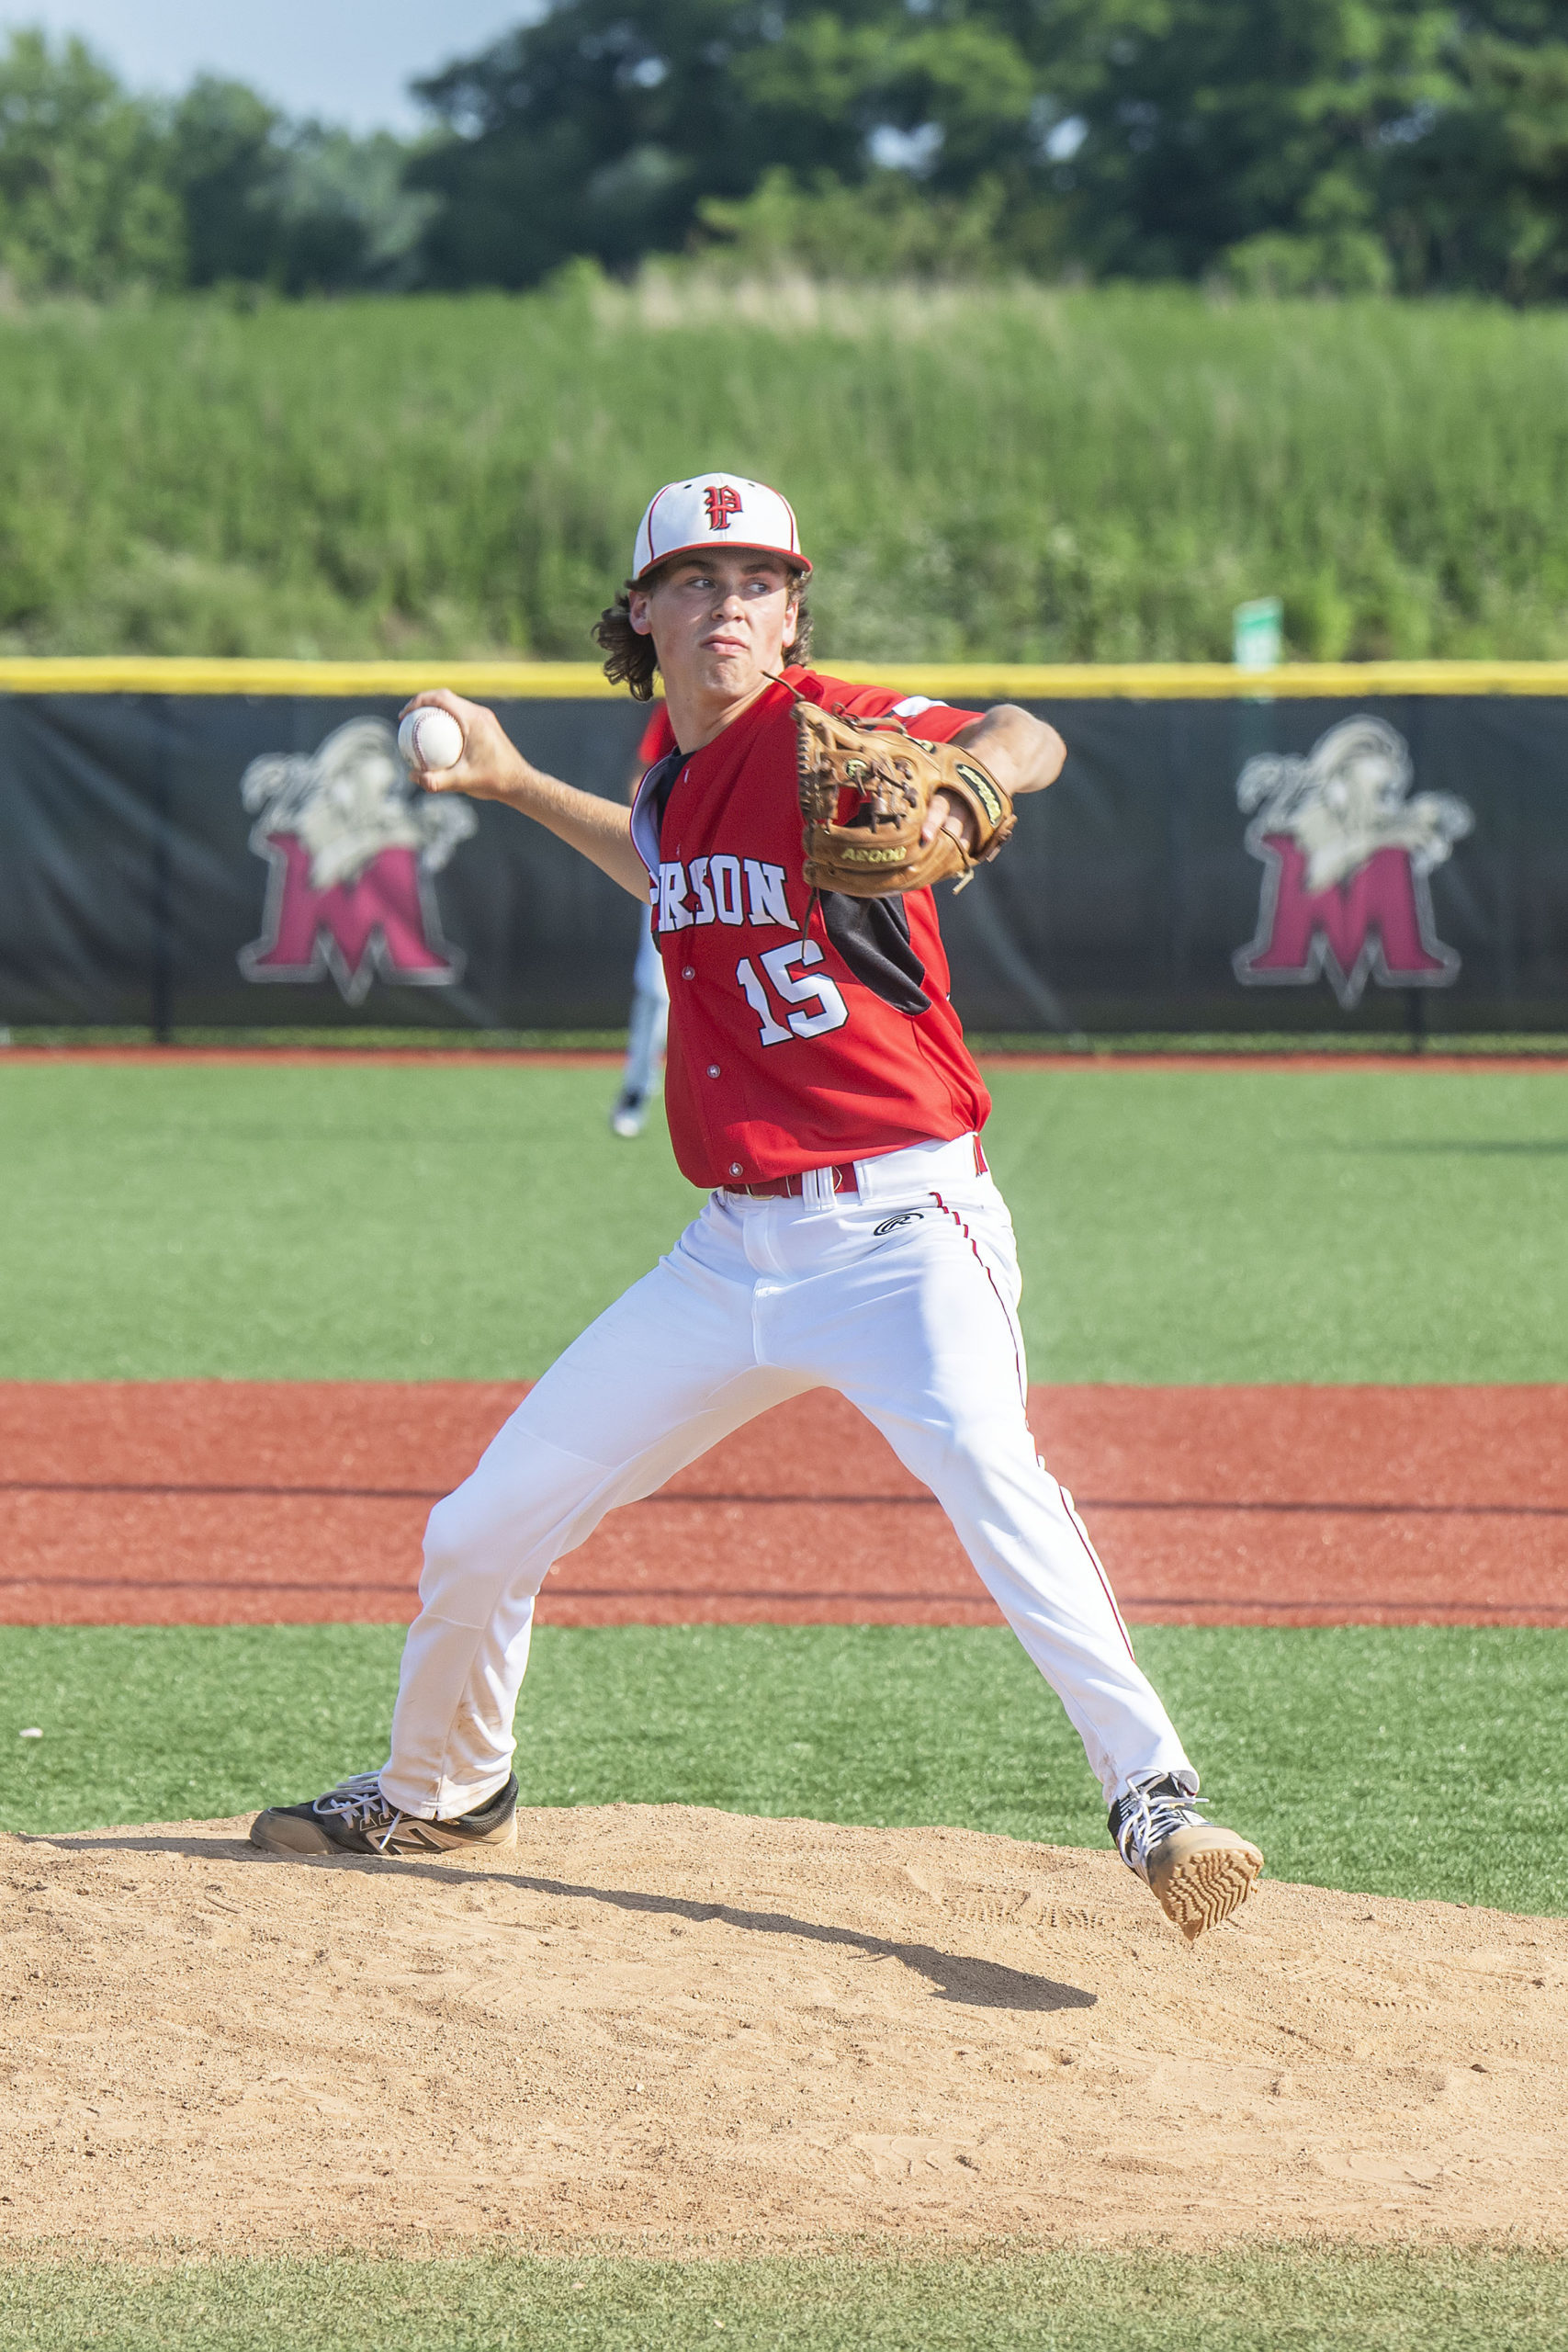 Daniel Labrozzi started on the mound for Pierson in Sunday's Long Island Championship at Mitchel Field in Hempstead.